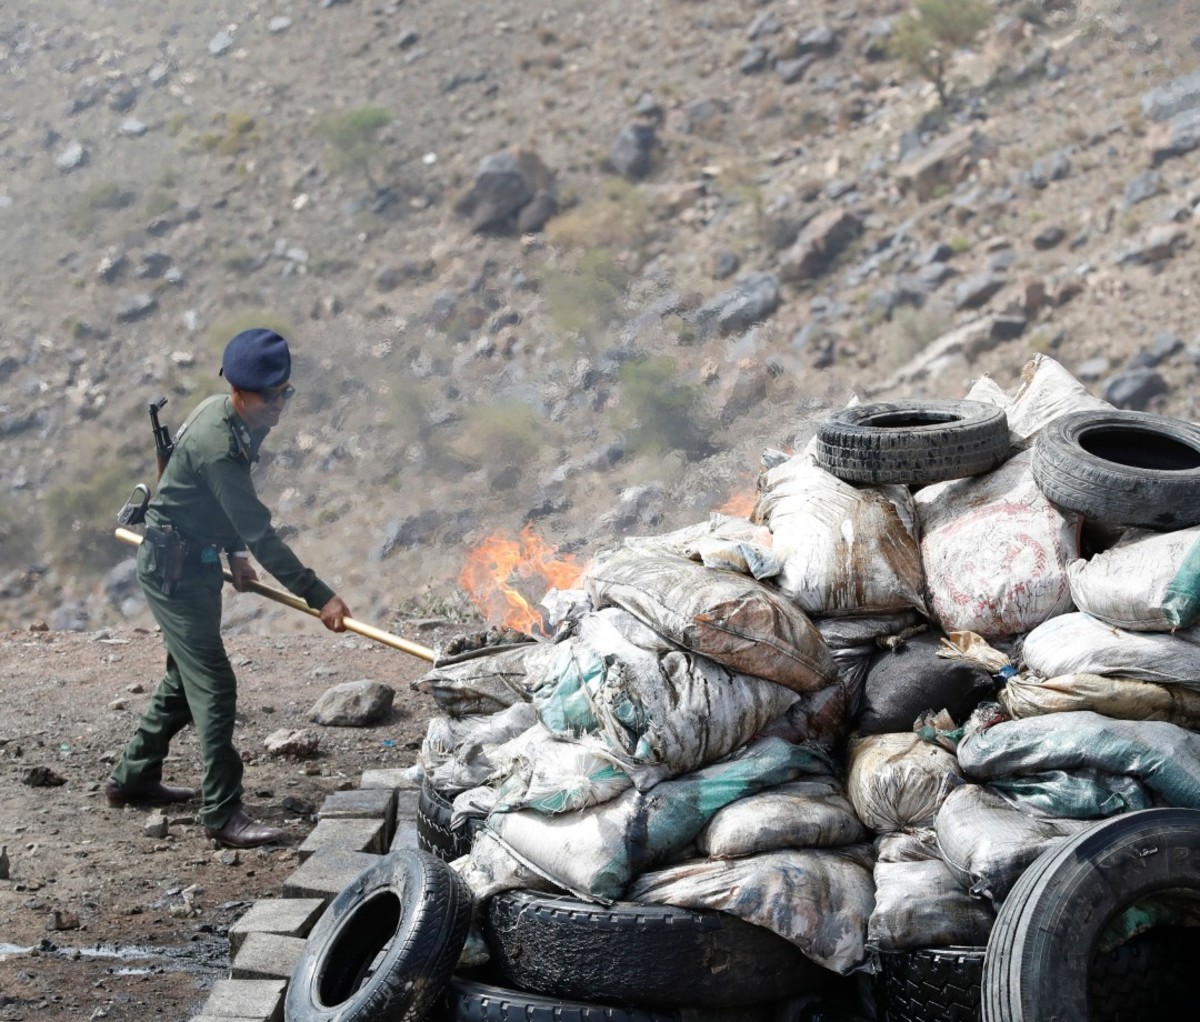 A Yemeni policeman incinerates sacks of seized narcotic drugs